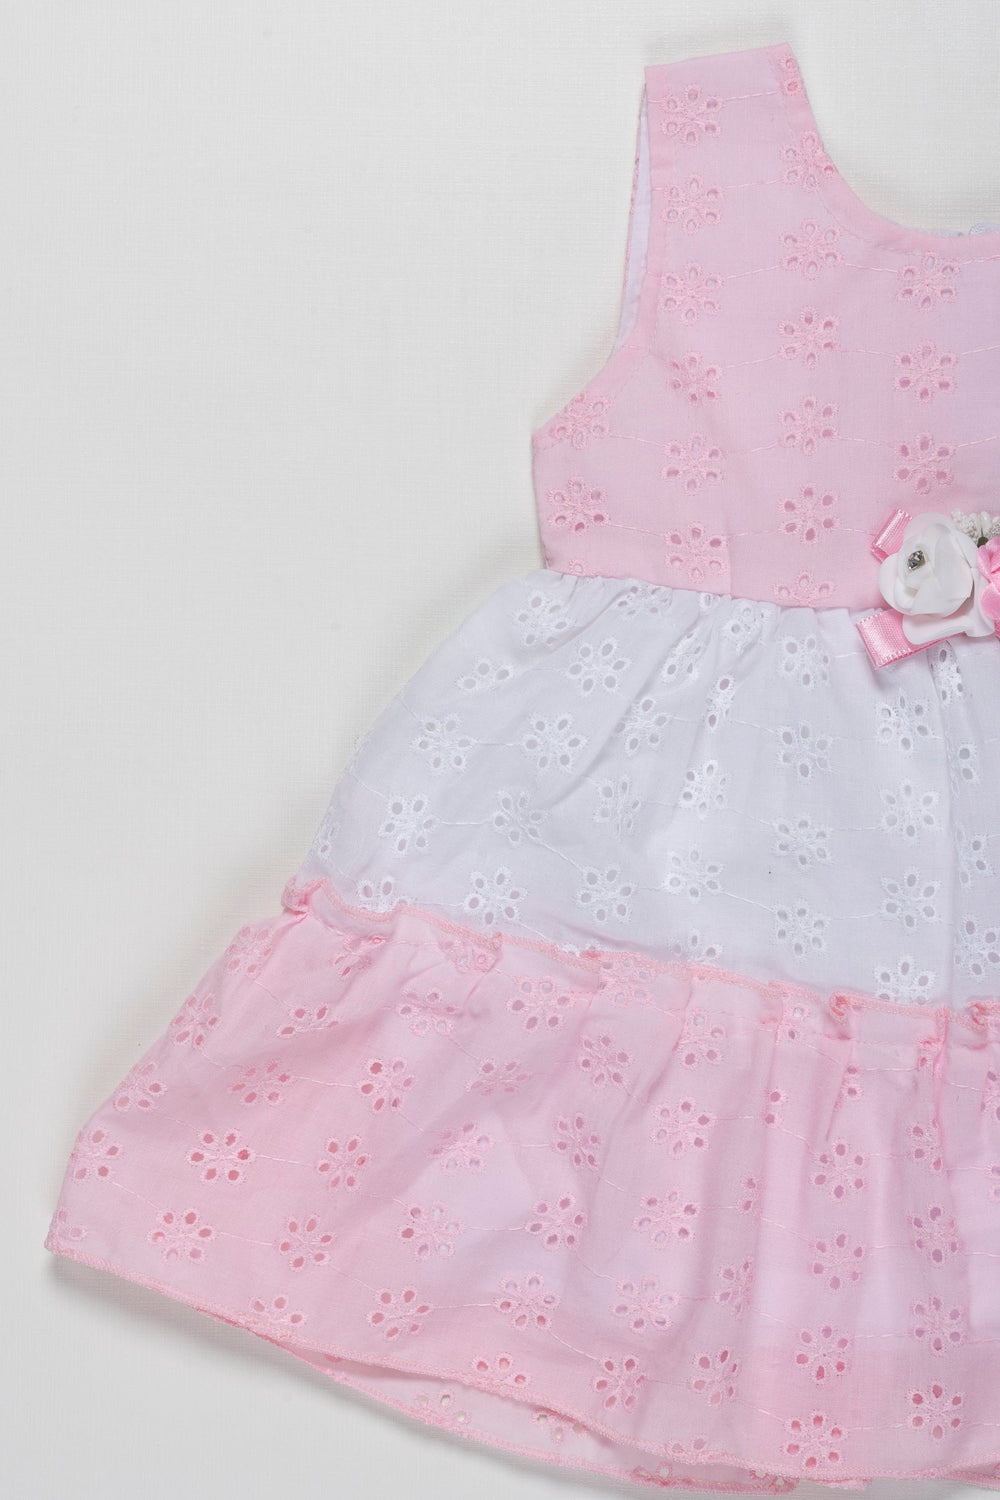 The Nesavu Baby Cotton Frocks Pastel Perfection Eyelet Lace Baby Girl Frock - Pink & White Floral Accents Nesavu Charming Cotton Eyelet Baby Girls Summer Dress with Floral Waistband | The Nesavu